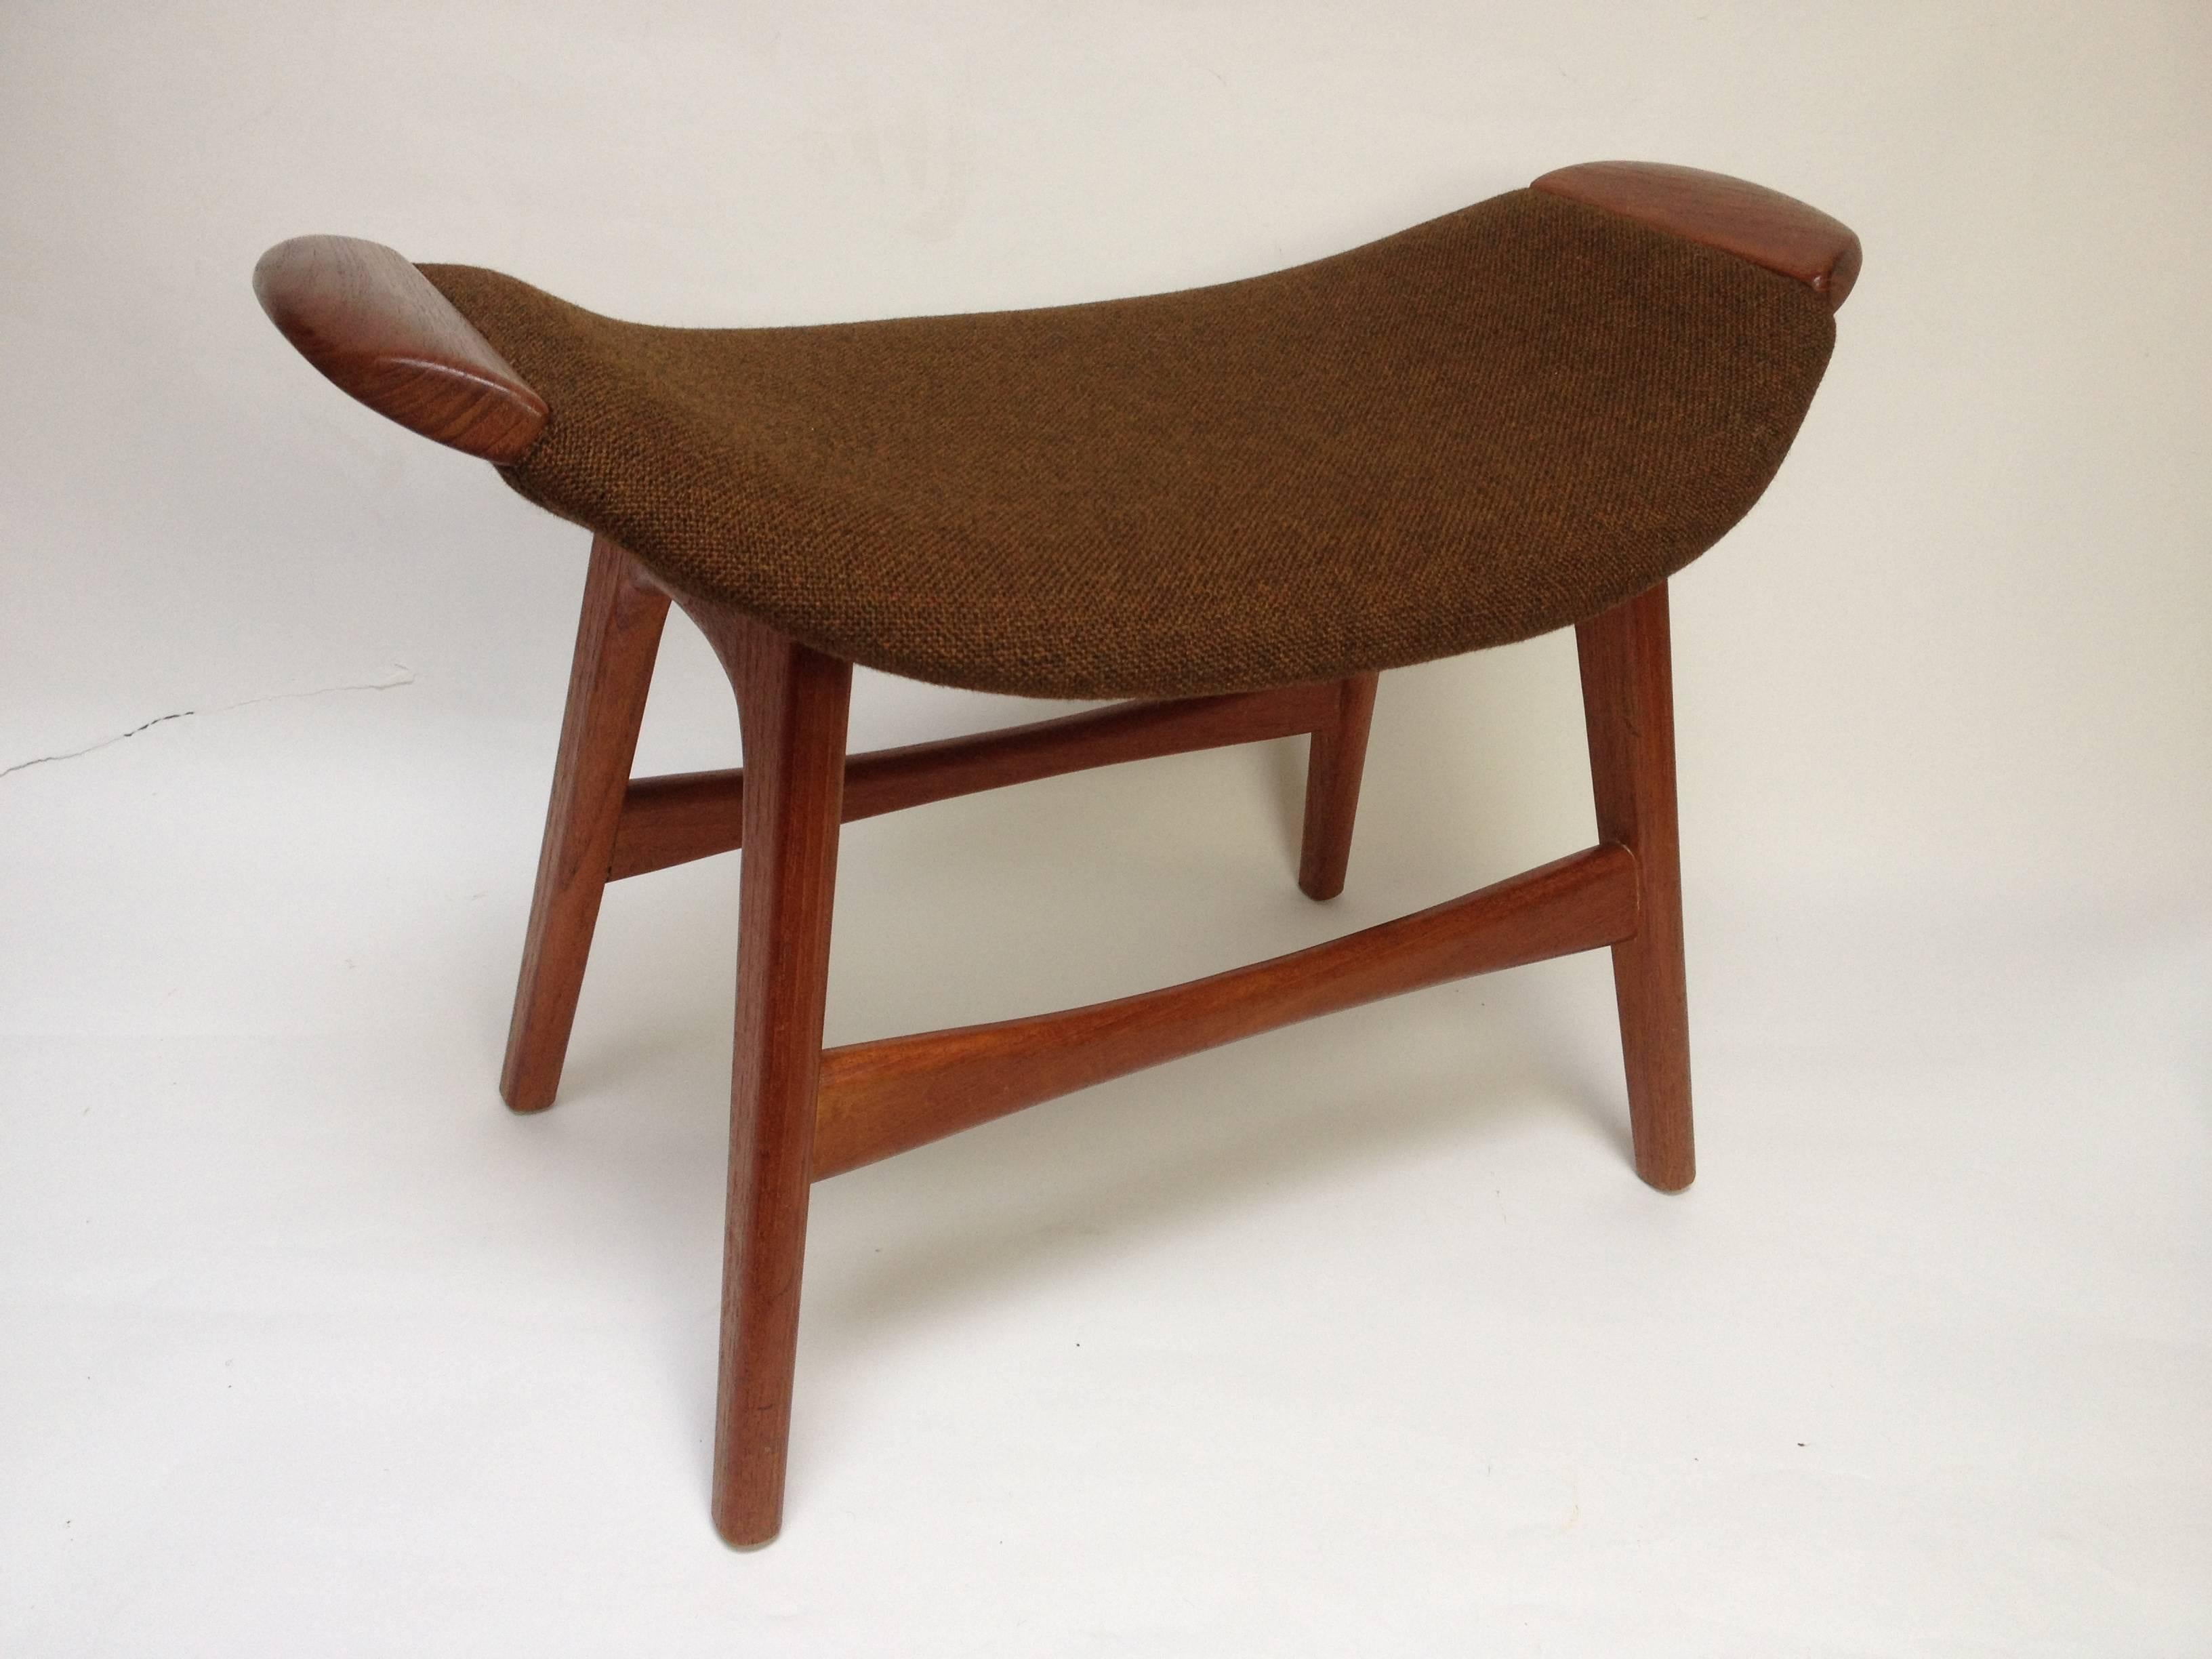 Fantastic Norwegian footstool in teak with original upholstery imported by Westnofa, Canada to store in Winnipeg, House of Teak, very good vintage condition, perfect to pair up with your favorite Mid-Century Modern chair.